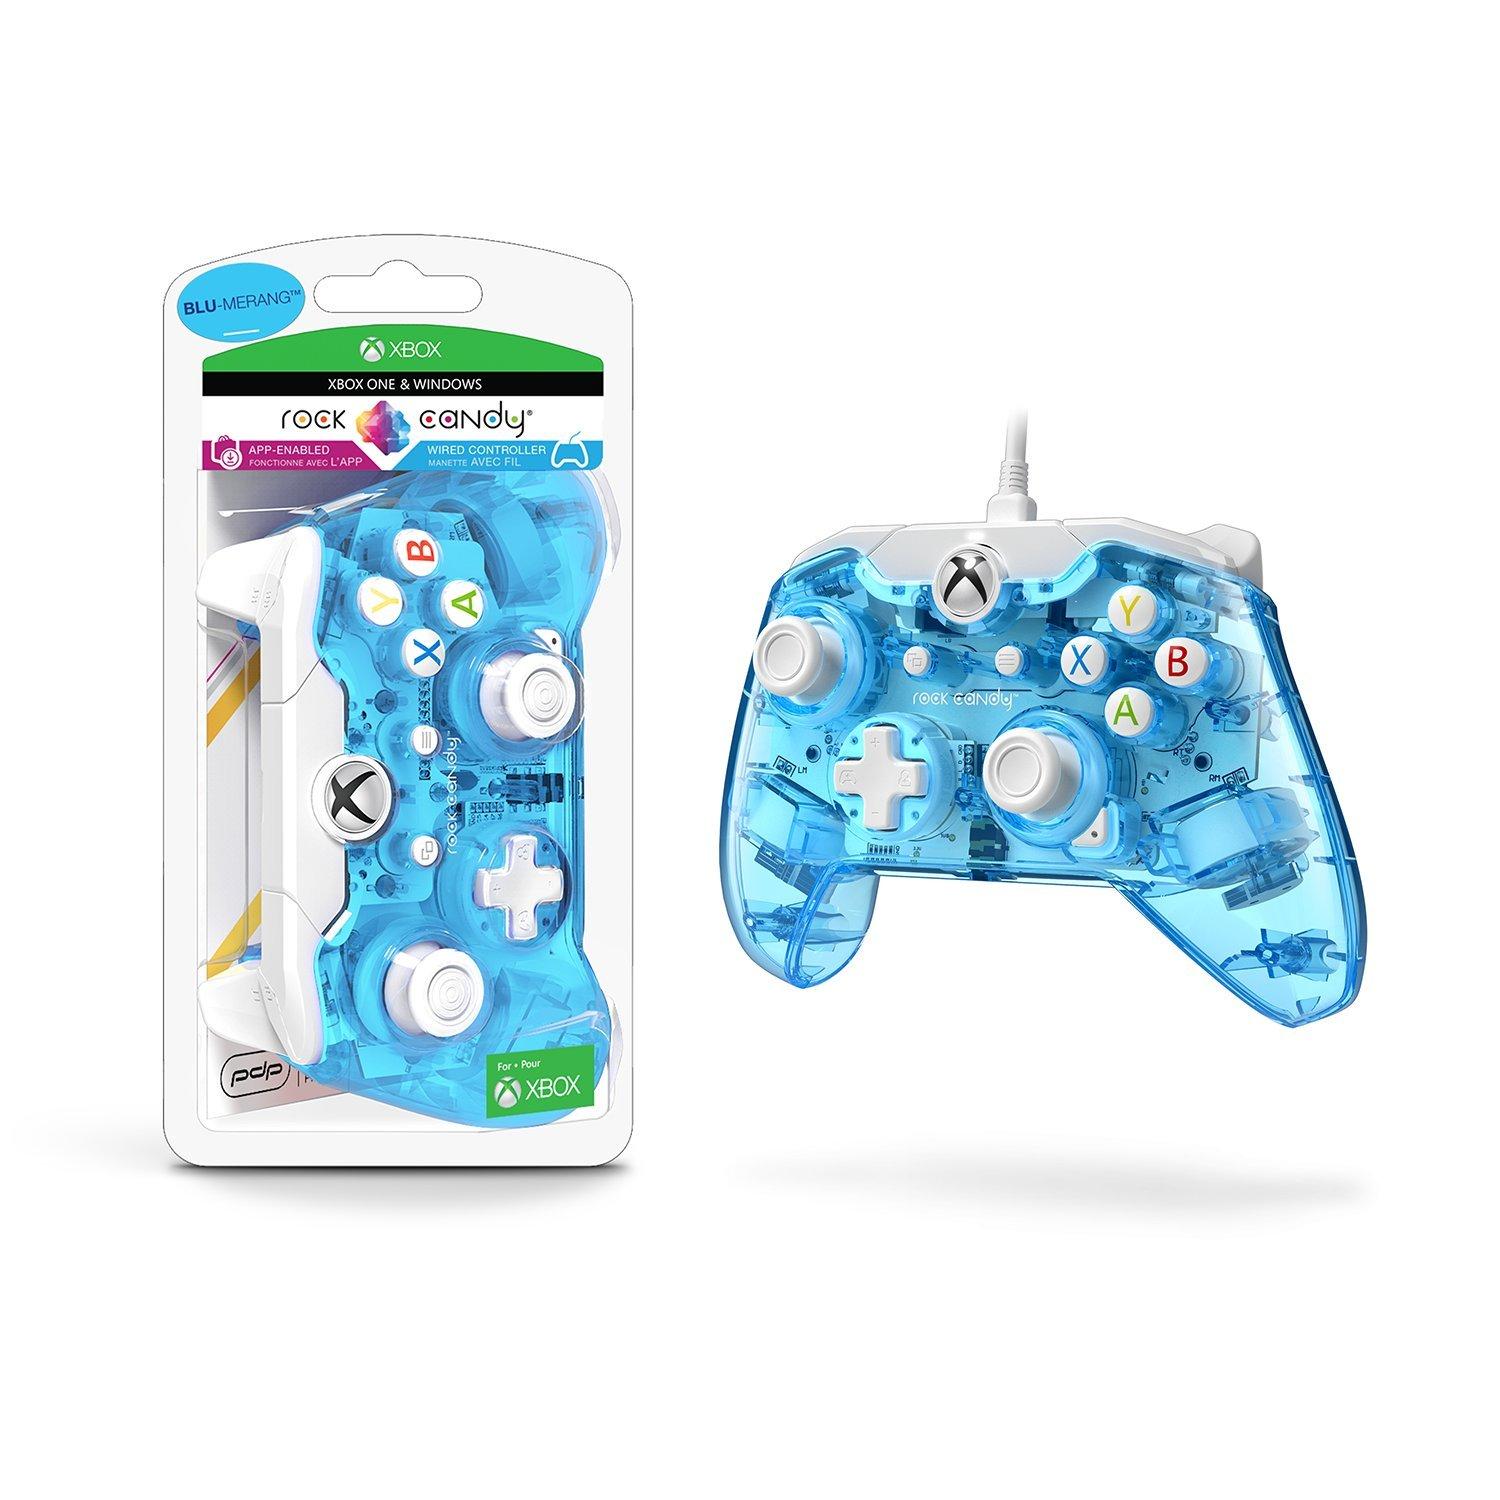 pdp rock candy wired controller for xbox 360